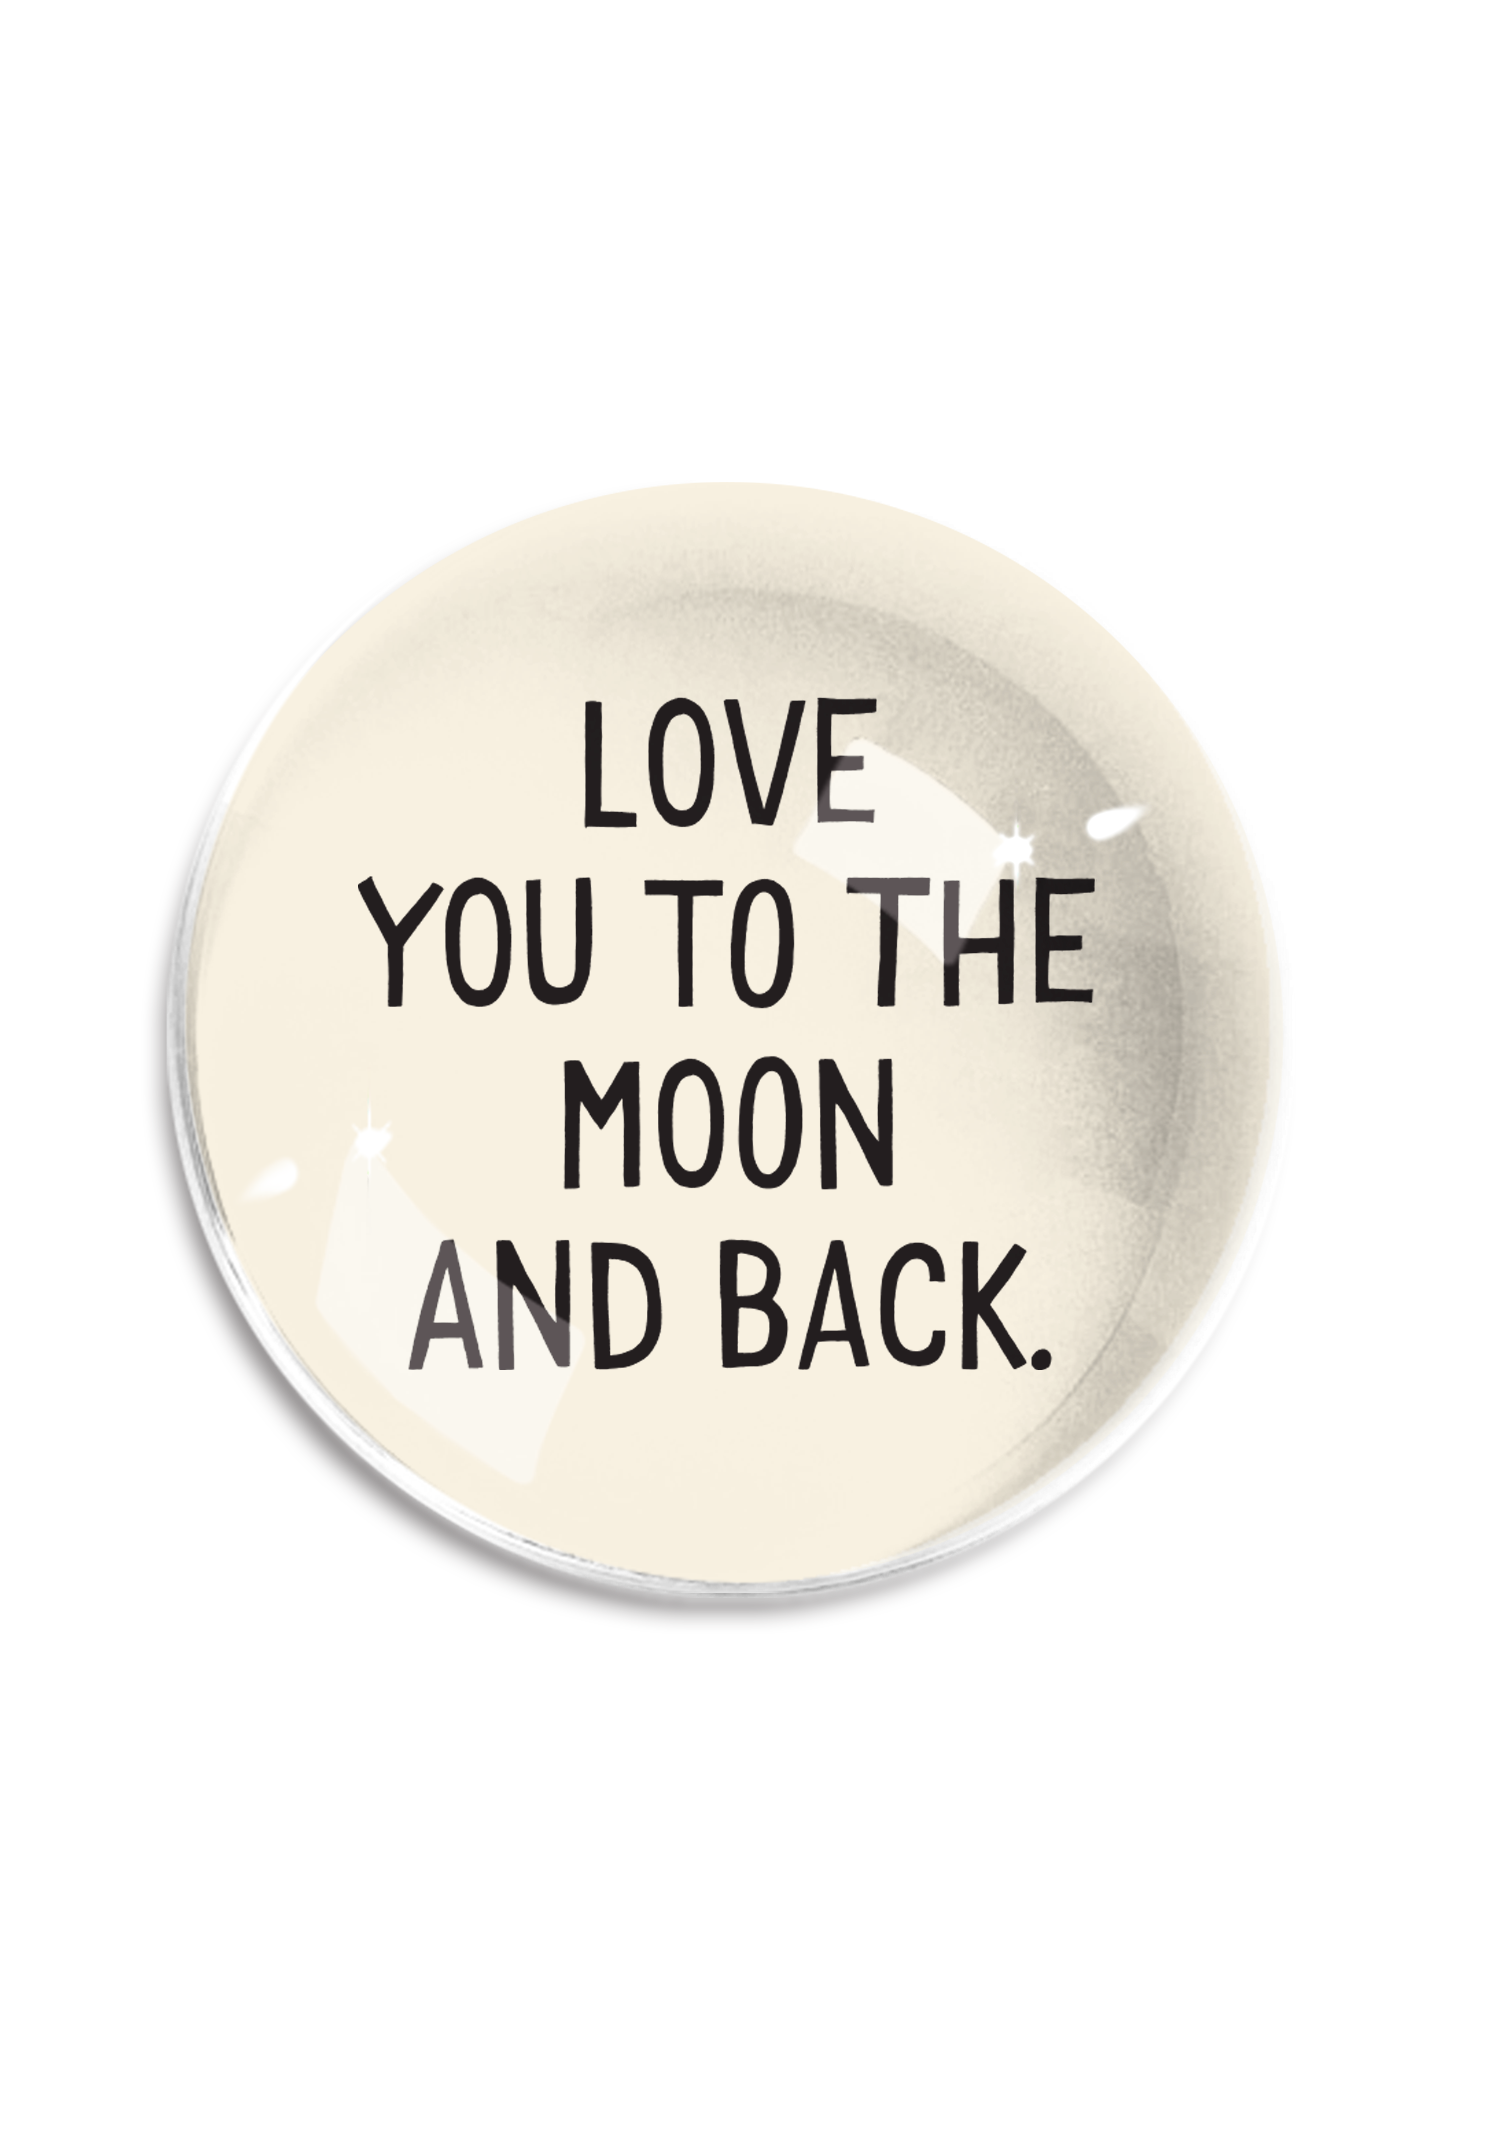 Bensgarden.com | Love You To The Moon Crystal Dome Paperweight - Ben's Garden. Made in New York City.